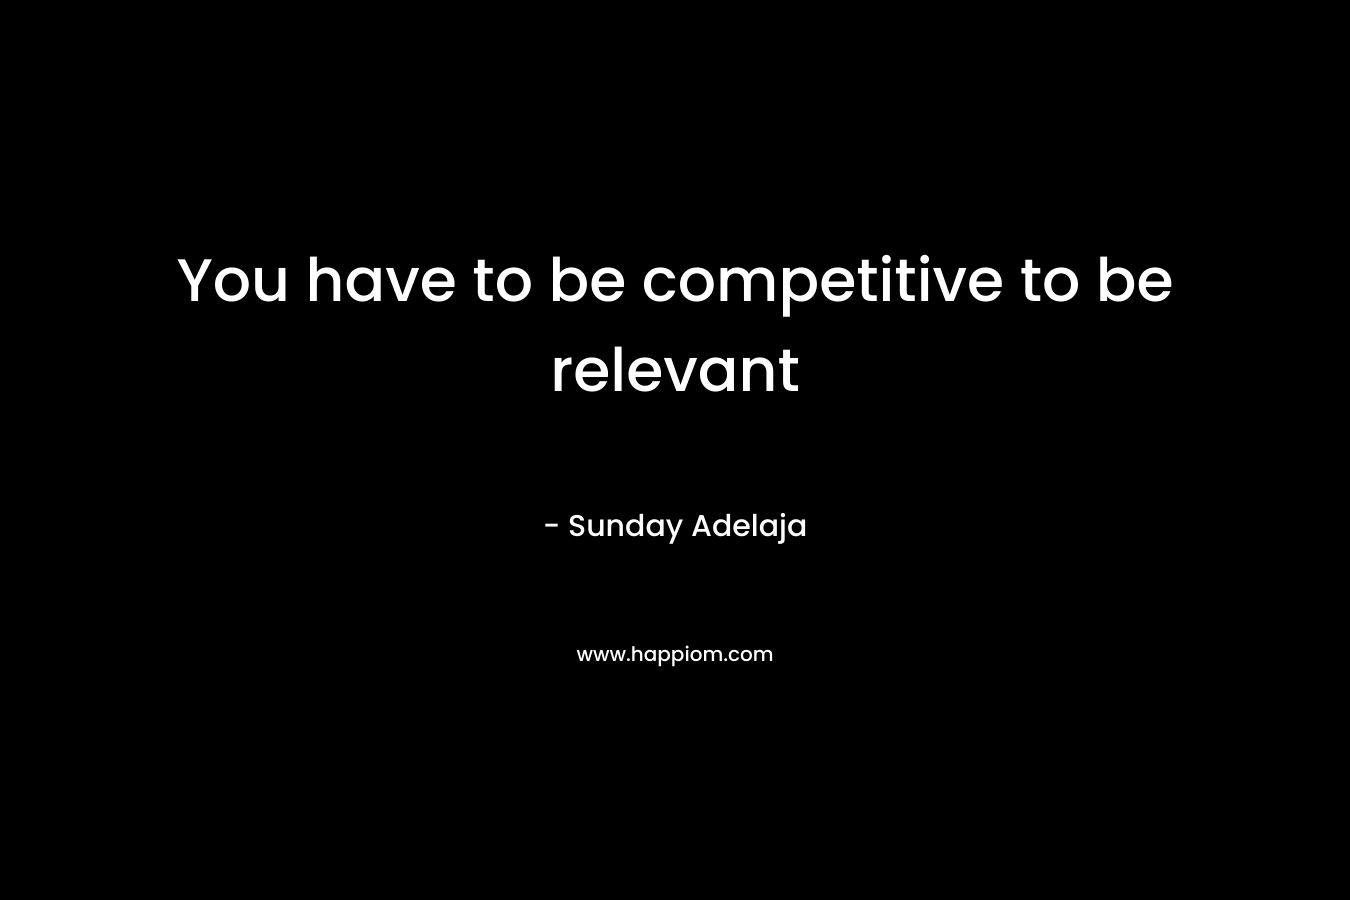 You have to be competitive to be relevant